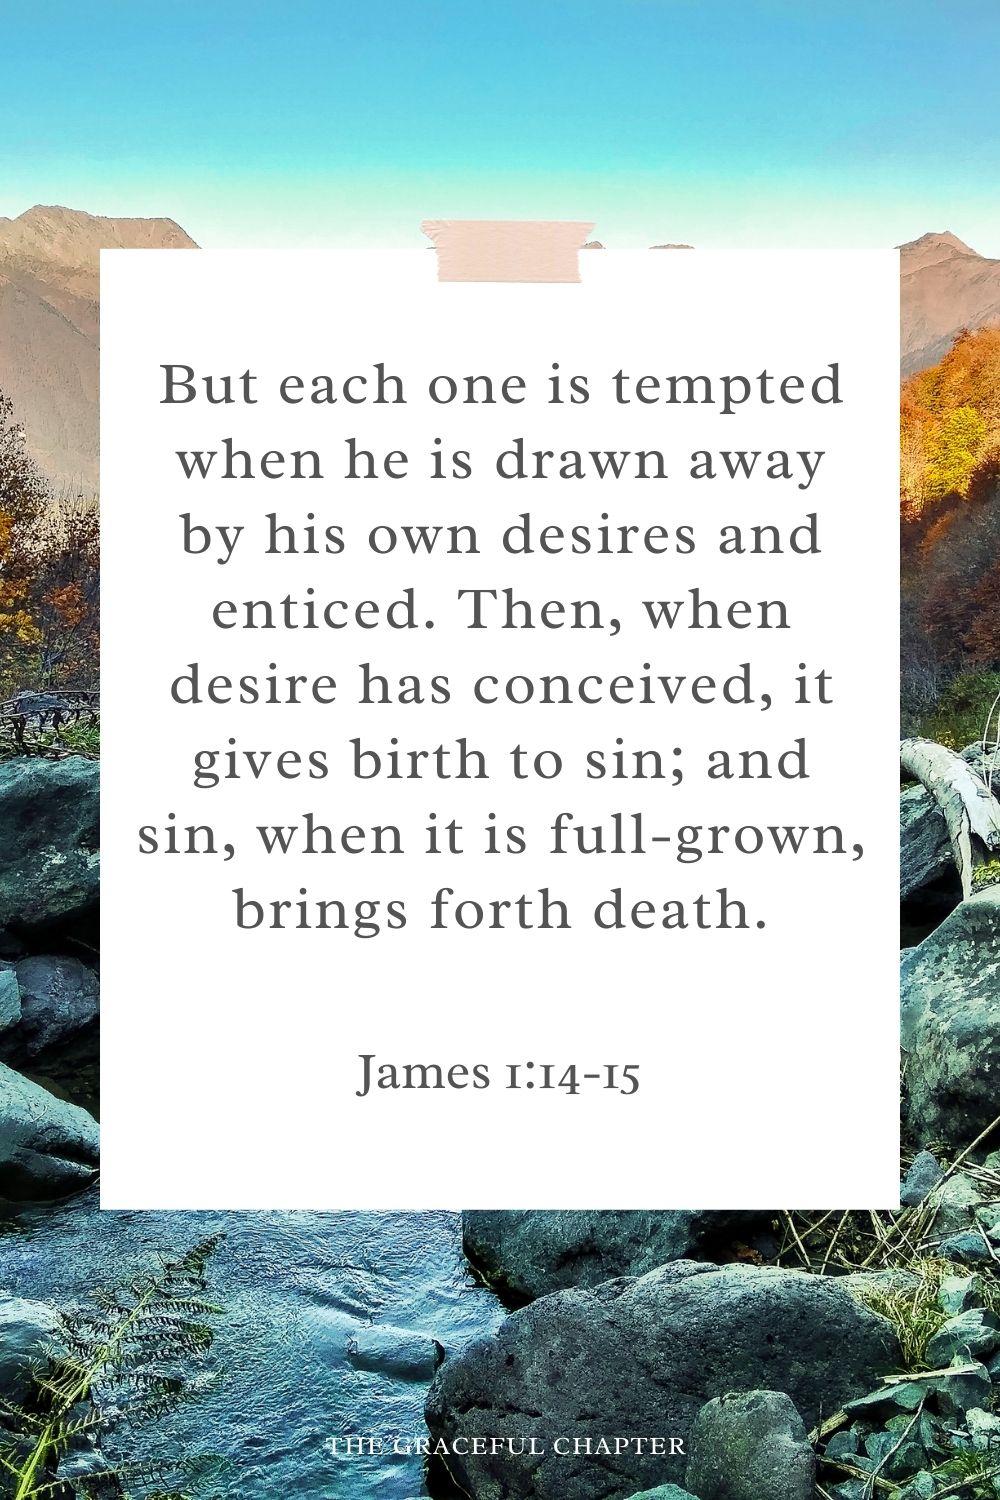 But each one is tempted when he is drawn away by his own desires and enticed. Then, when desire has conceived, it gives birth to sin; and sin, when it is full-grown, brings forth death. James 1:14-15